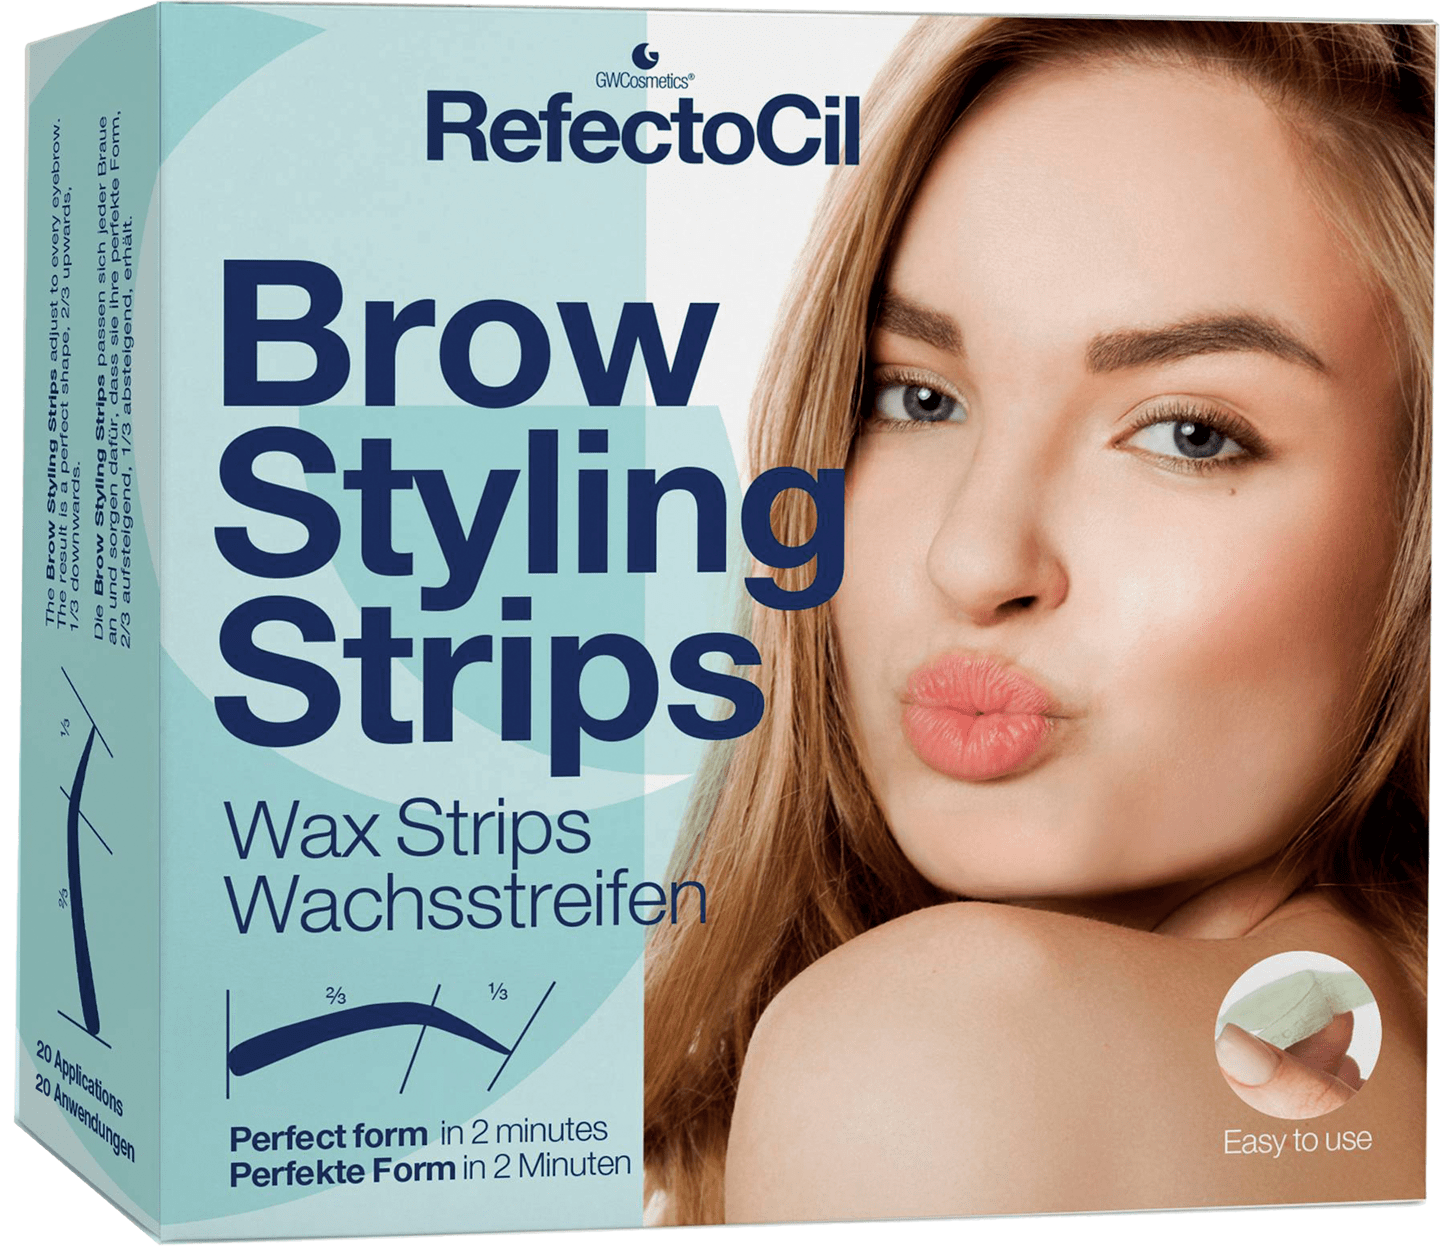 RefectoCil - Brow Styling Strips